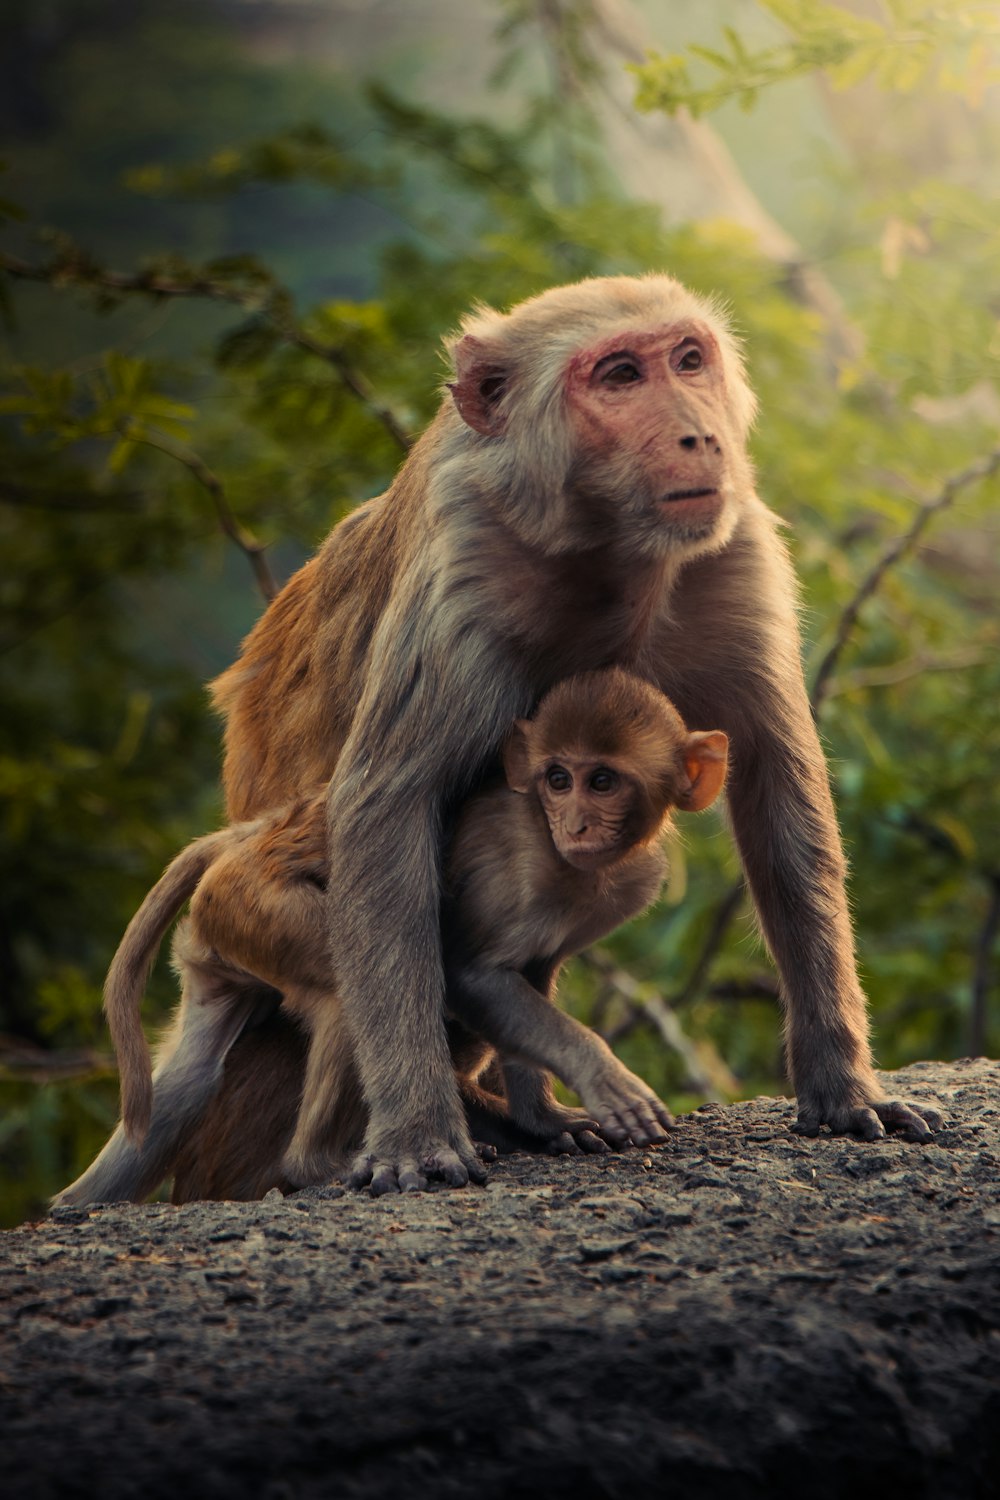 a monkey and a baby monkey standing on a rock